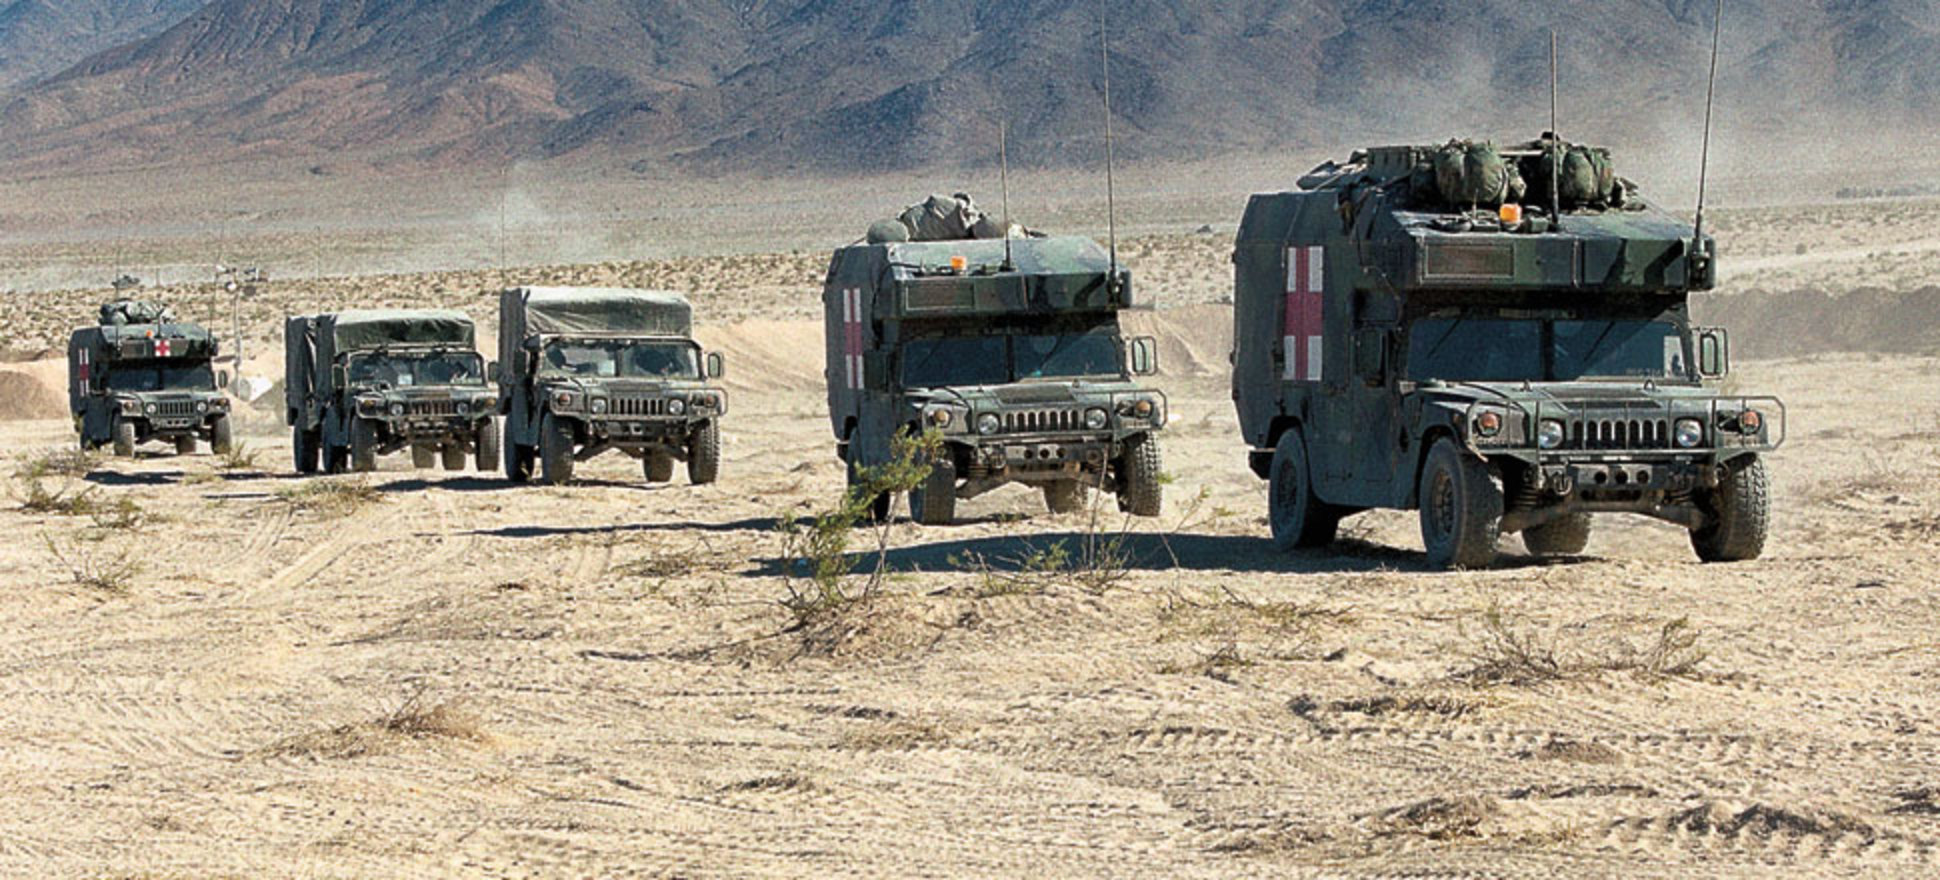 AM General HMMWV M997 A2: Photo gallery, complete information ...